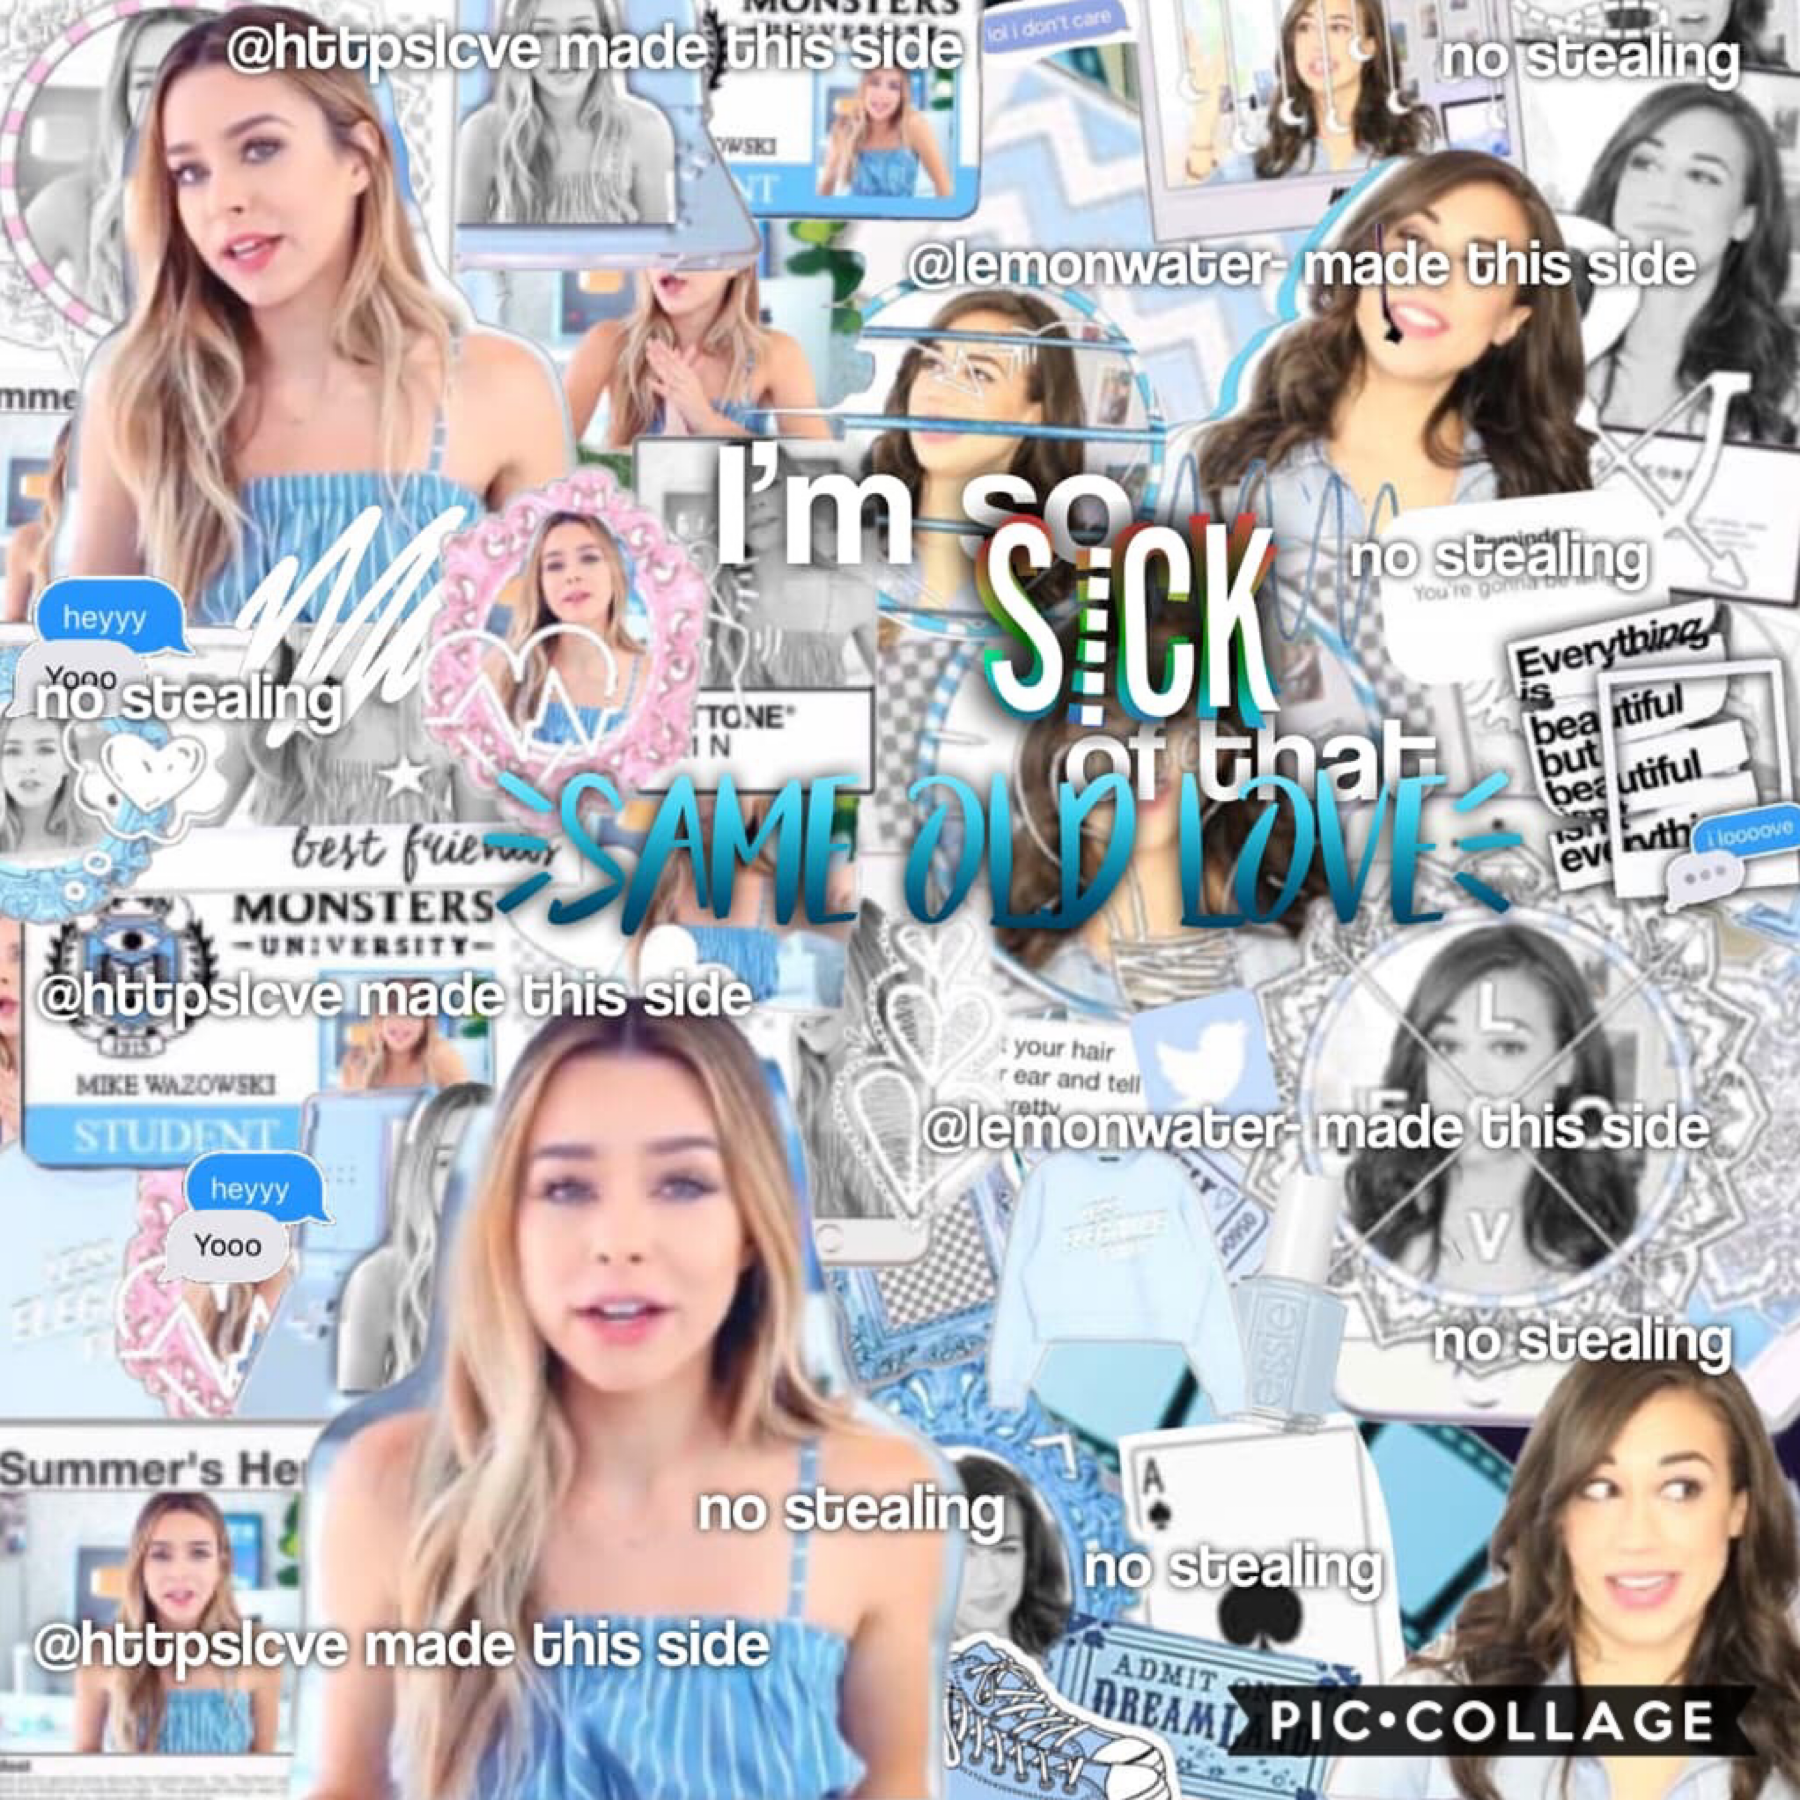 🍋tap🍋
Collab with httpslcve
Go follow her!
She did Sierra and I did Colleen!
